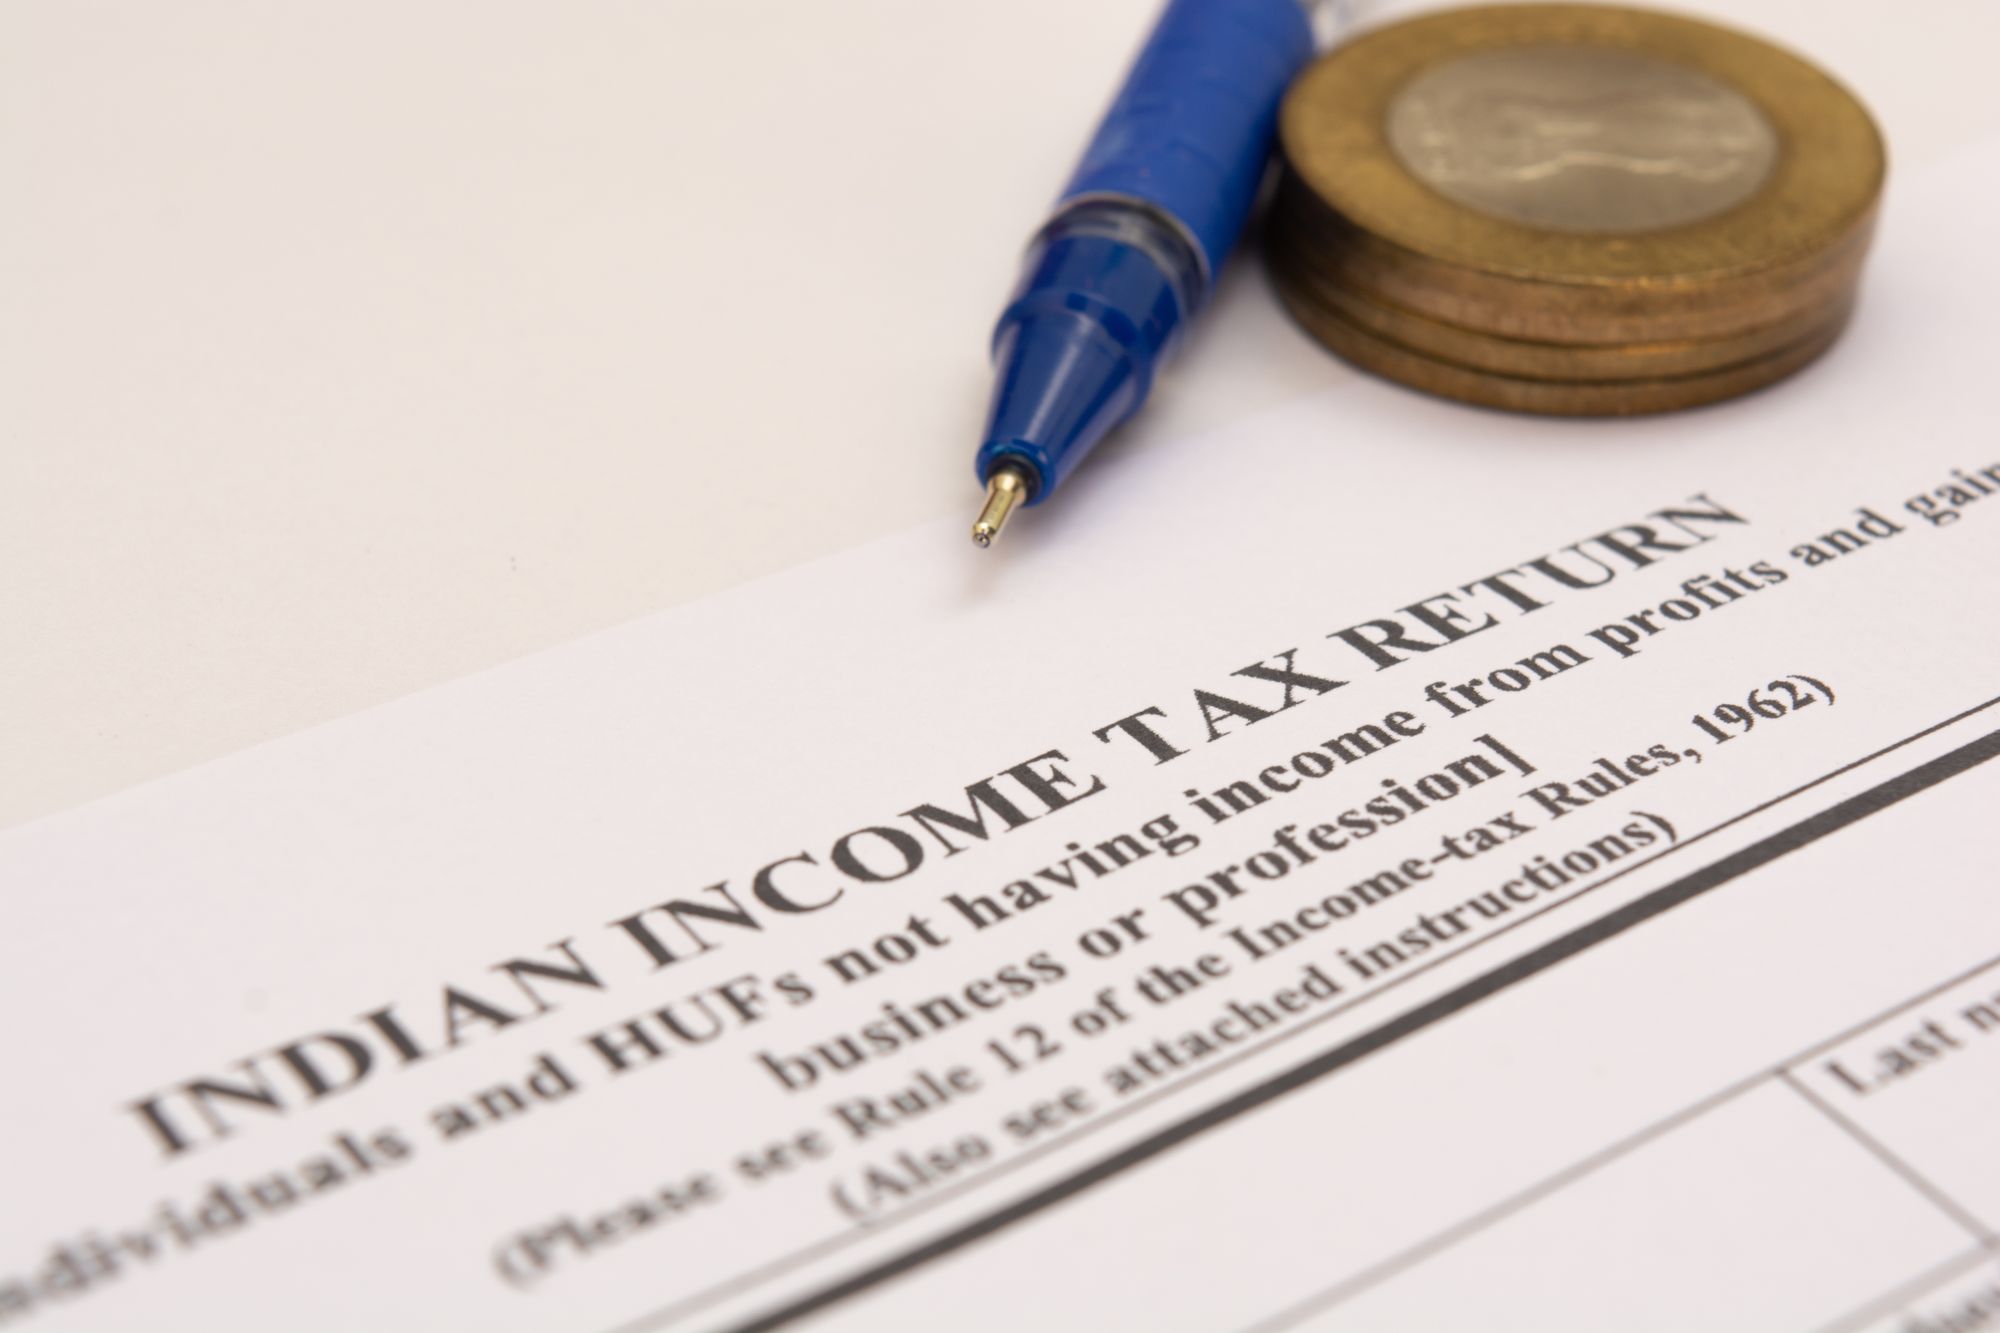 Old Tax Regime Vs New Tax Regime - Which is Better For You?